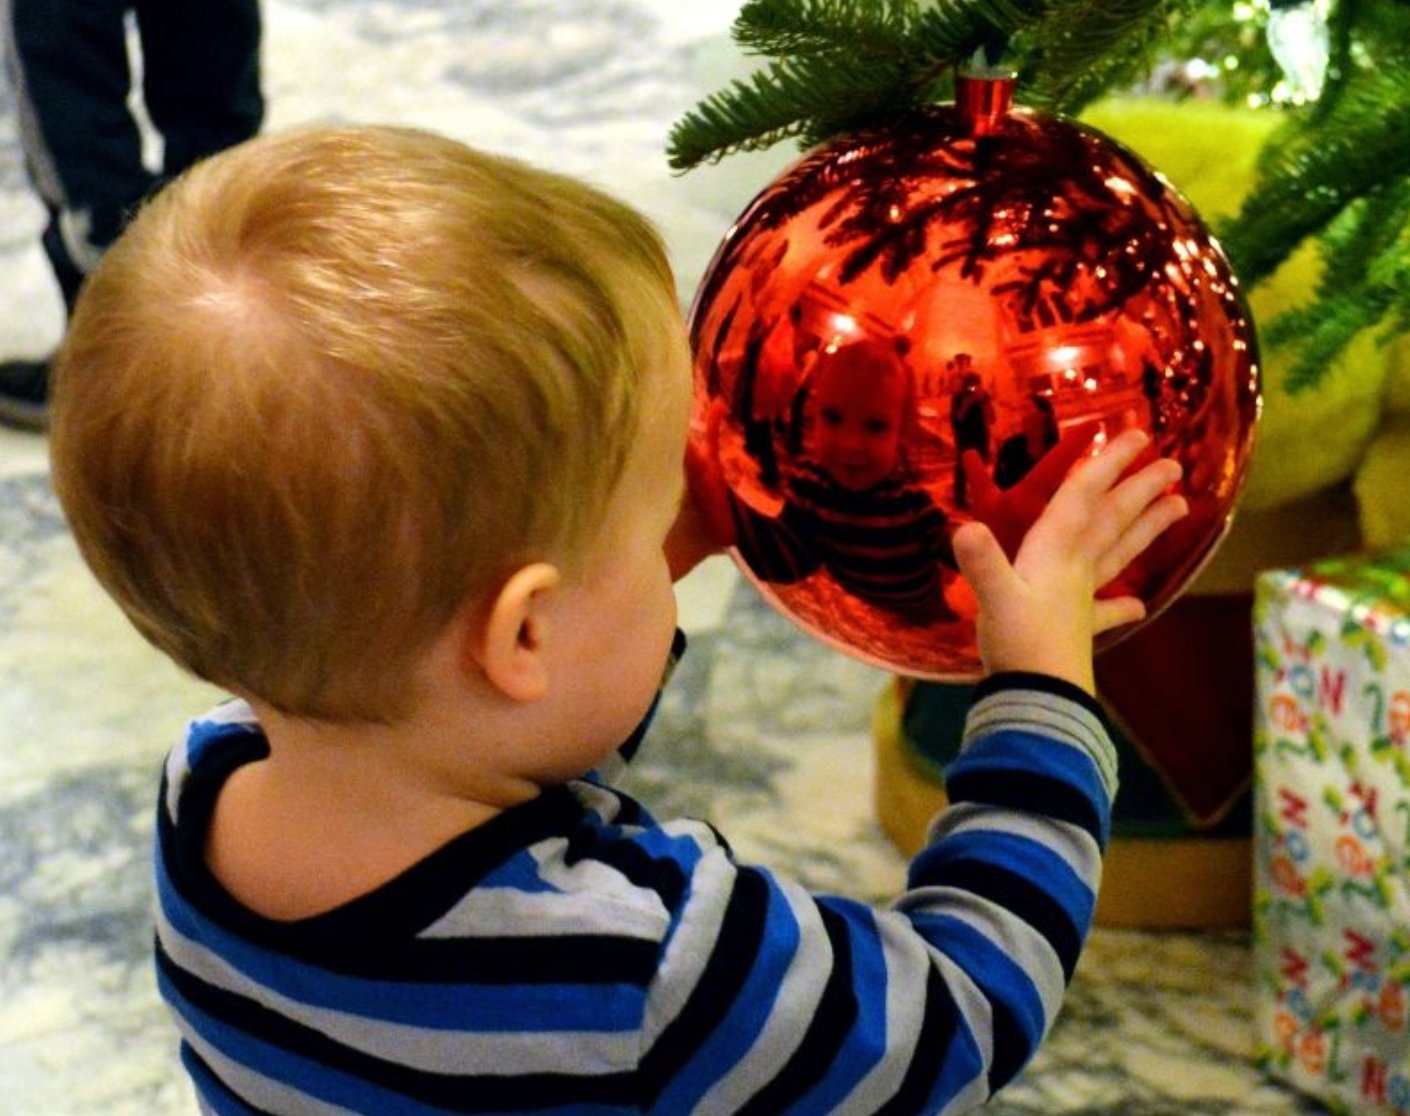 For more information on the Holiday Kids’ Tree Project, visit www.bit.ly/awbkidstree2021